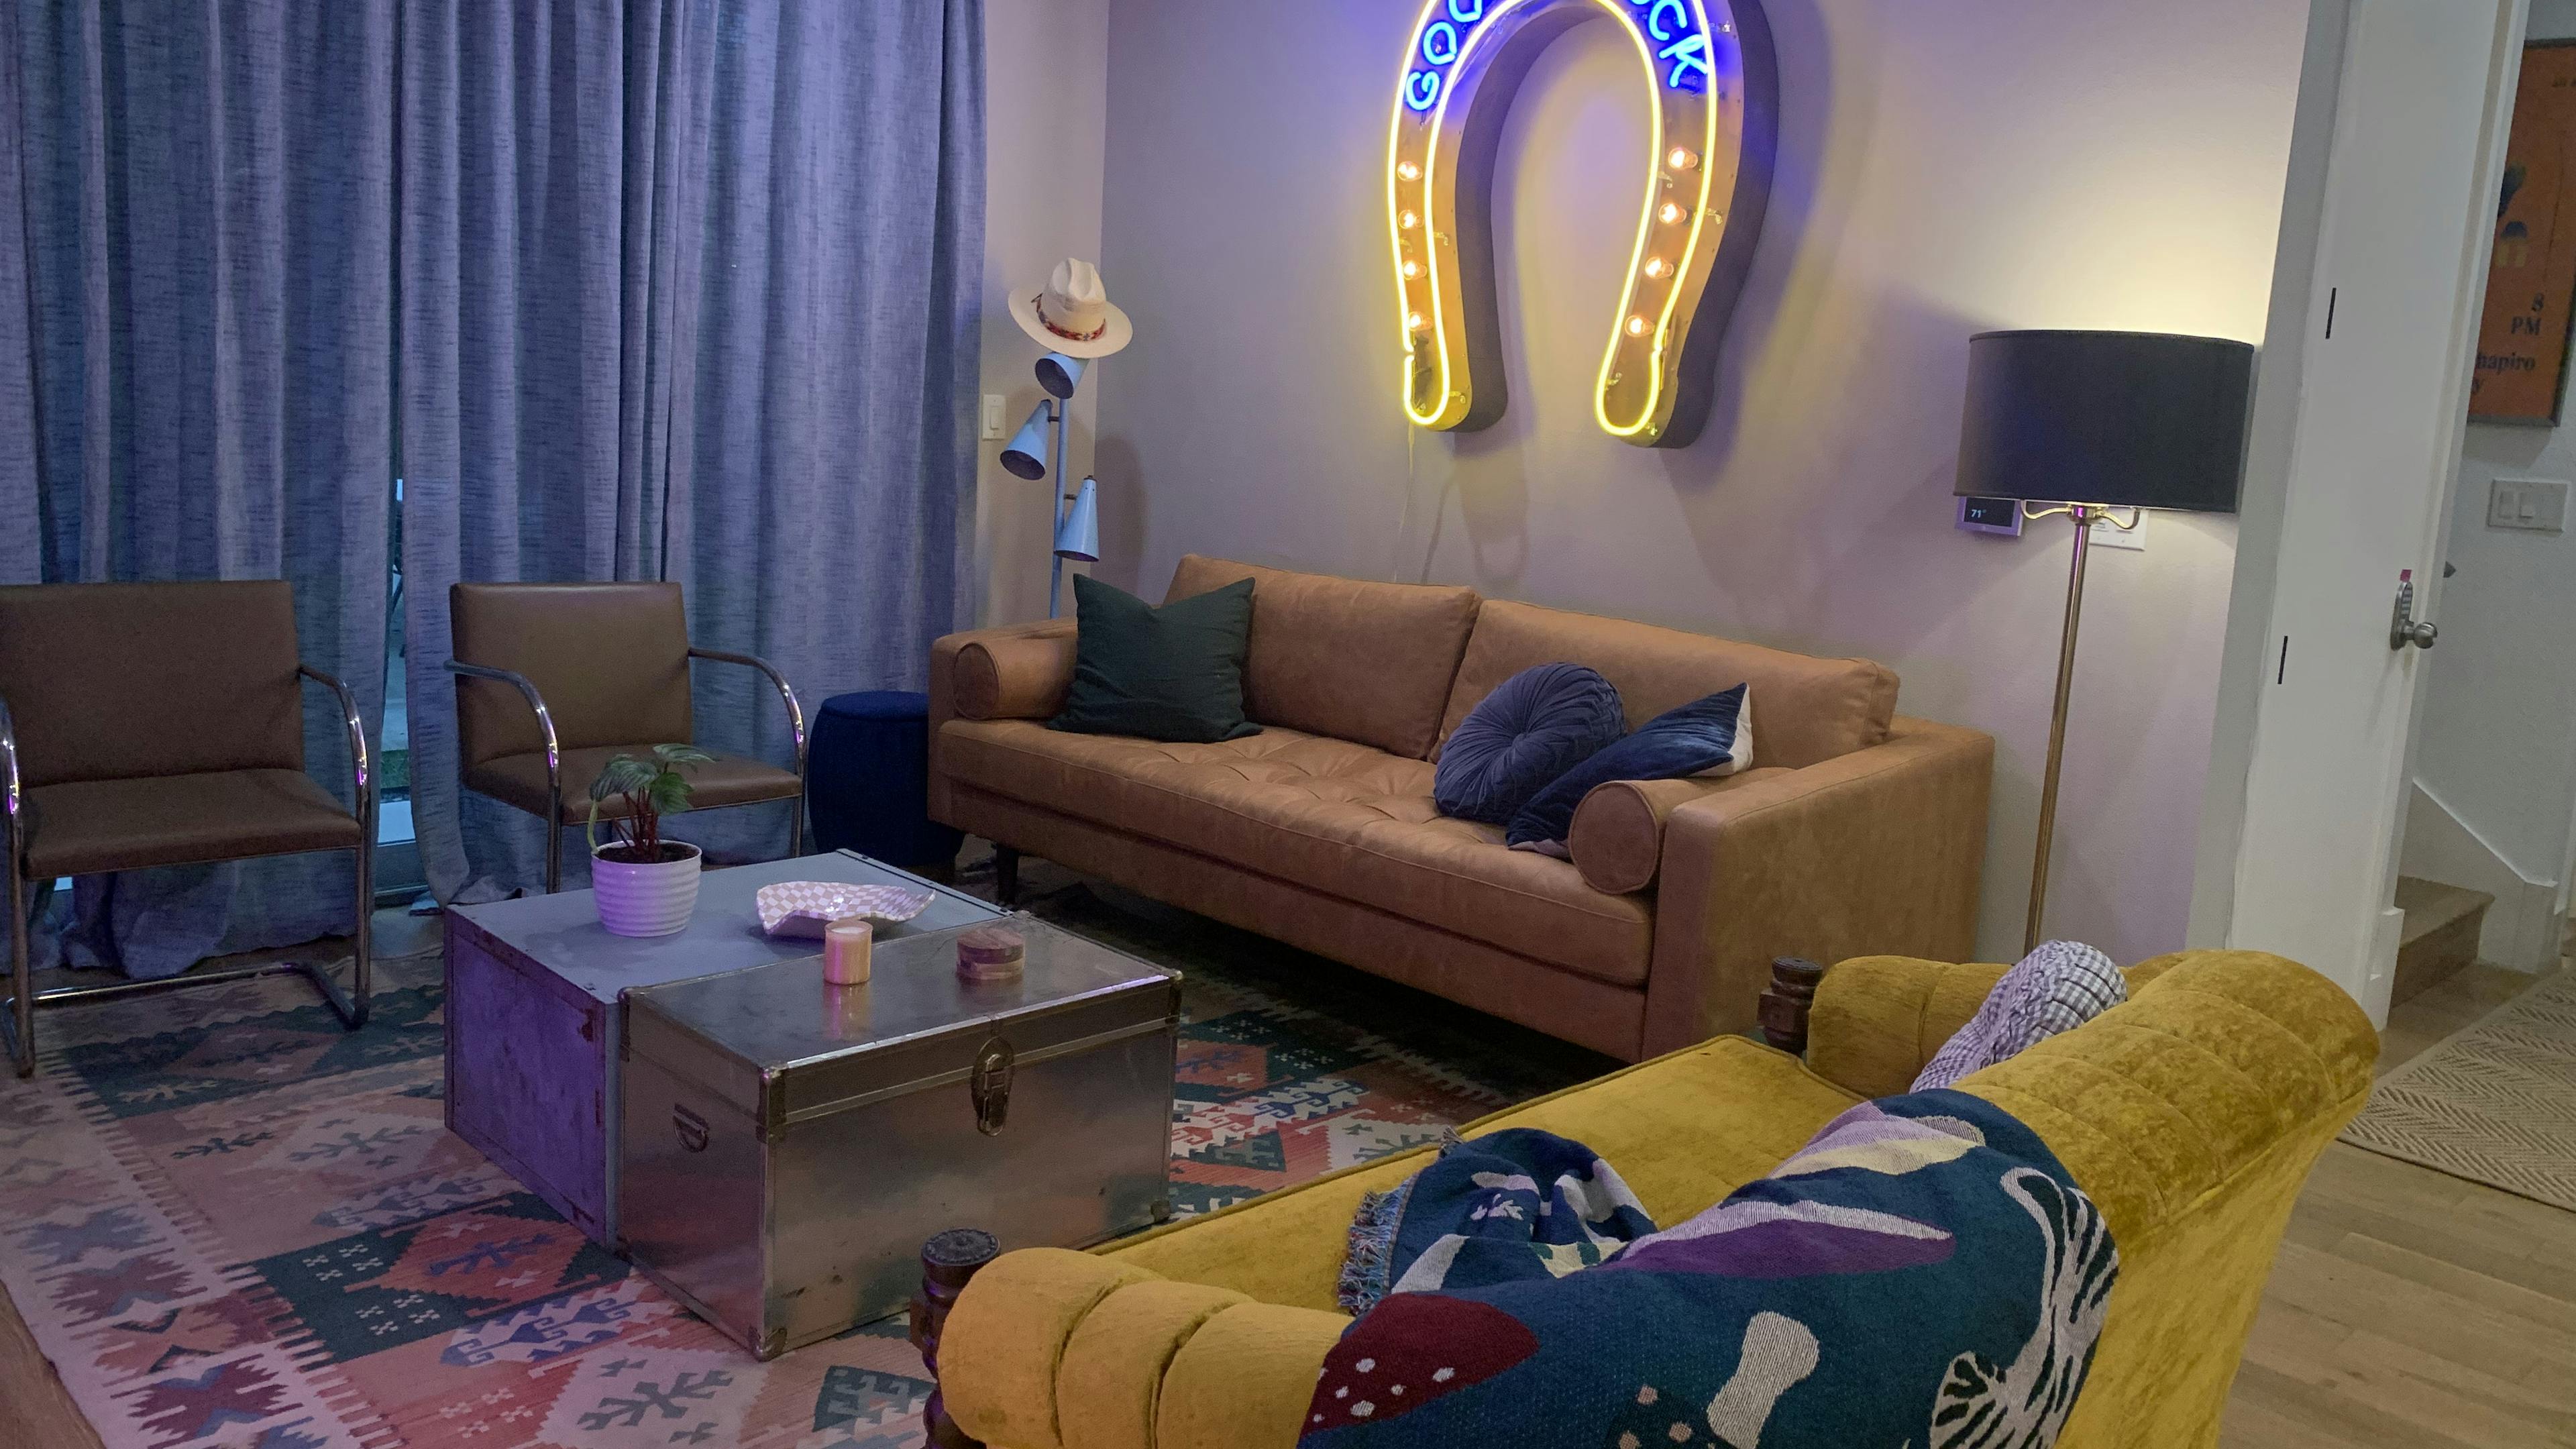 Two couches and chairs sit around a coffee table with a neon horseshoe with the text "Good luck" on the wall